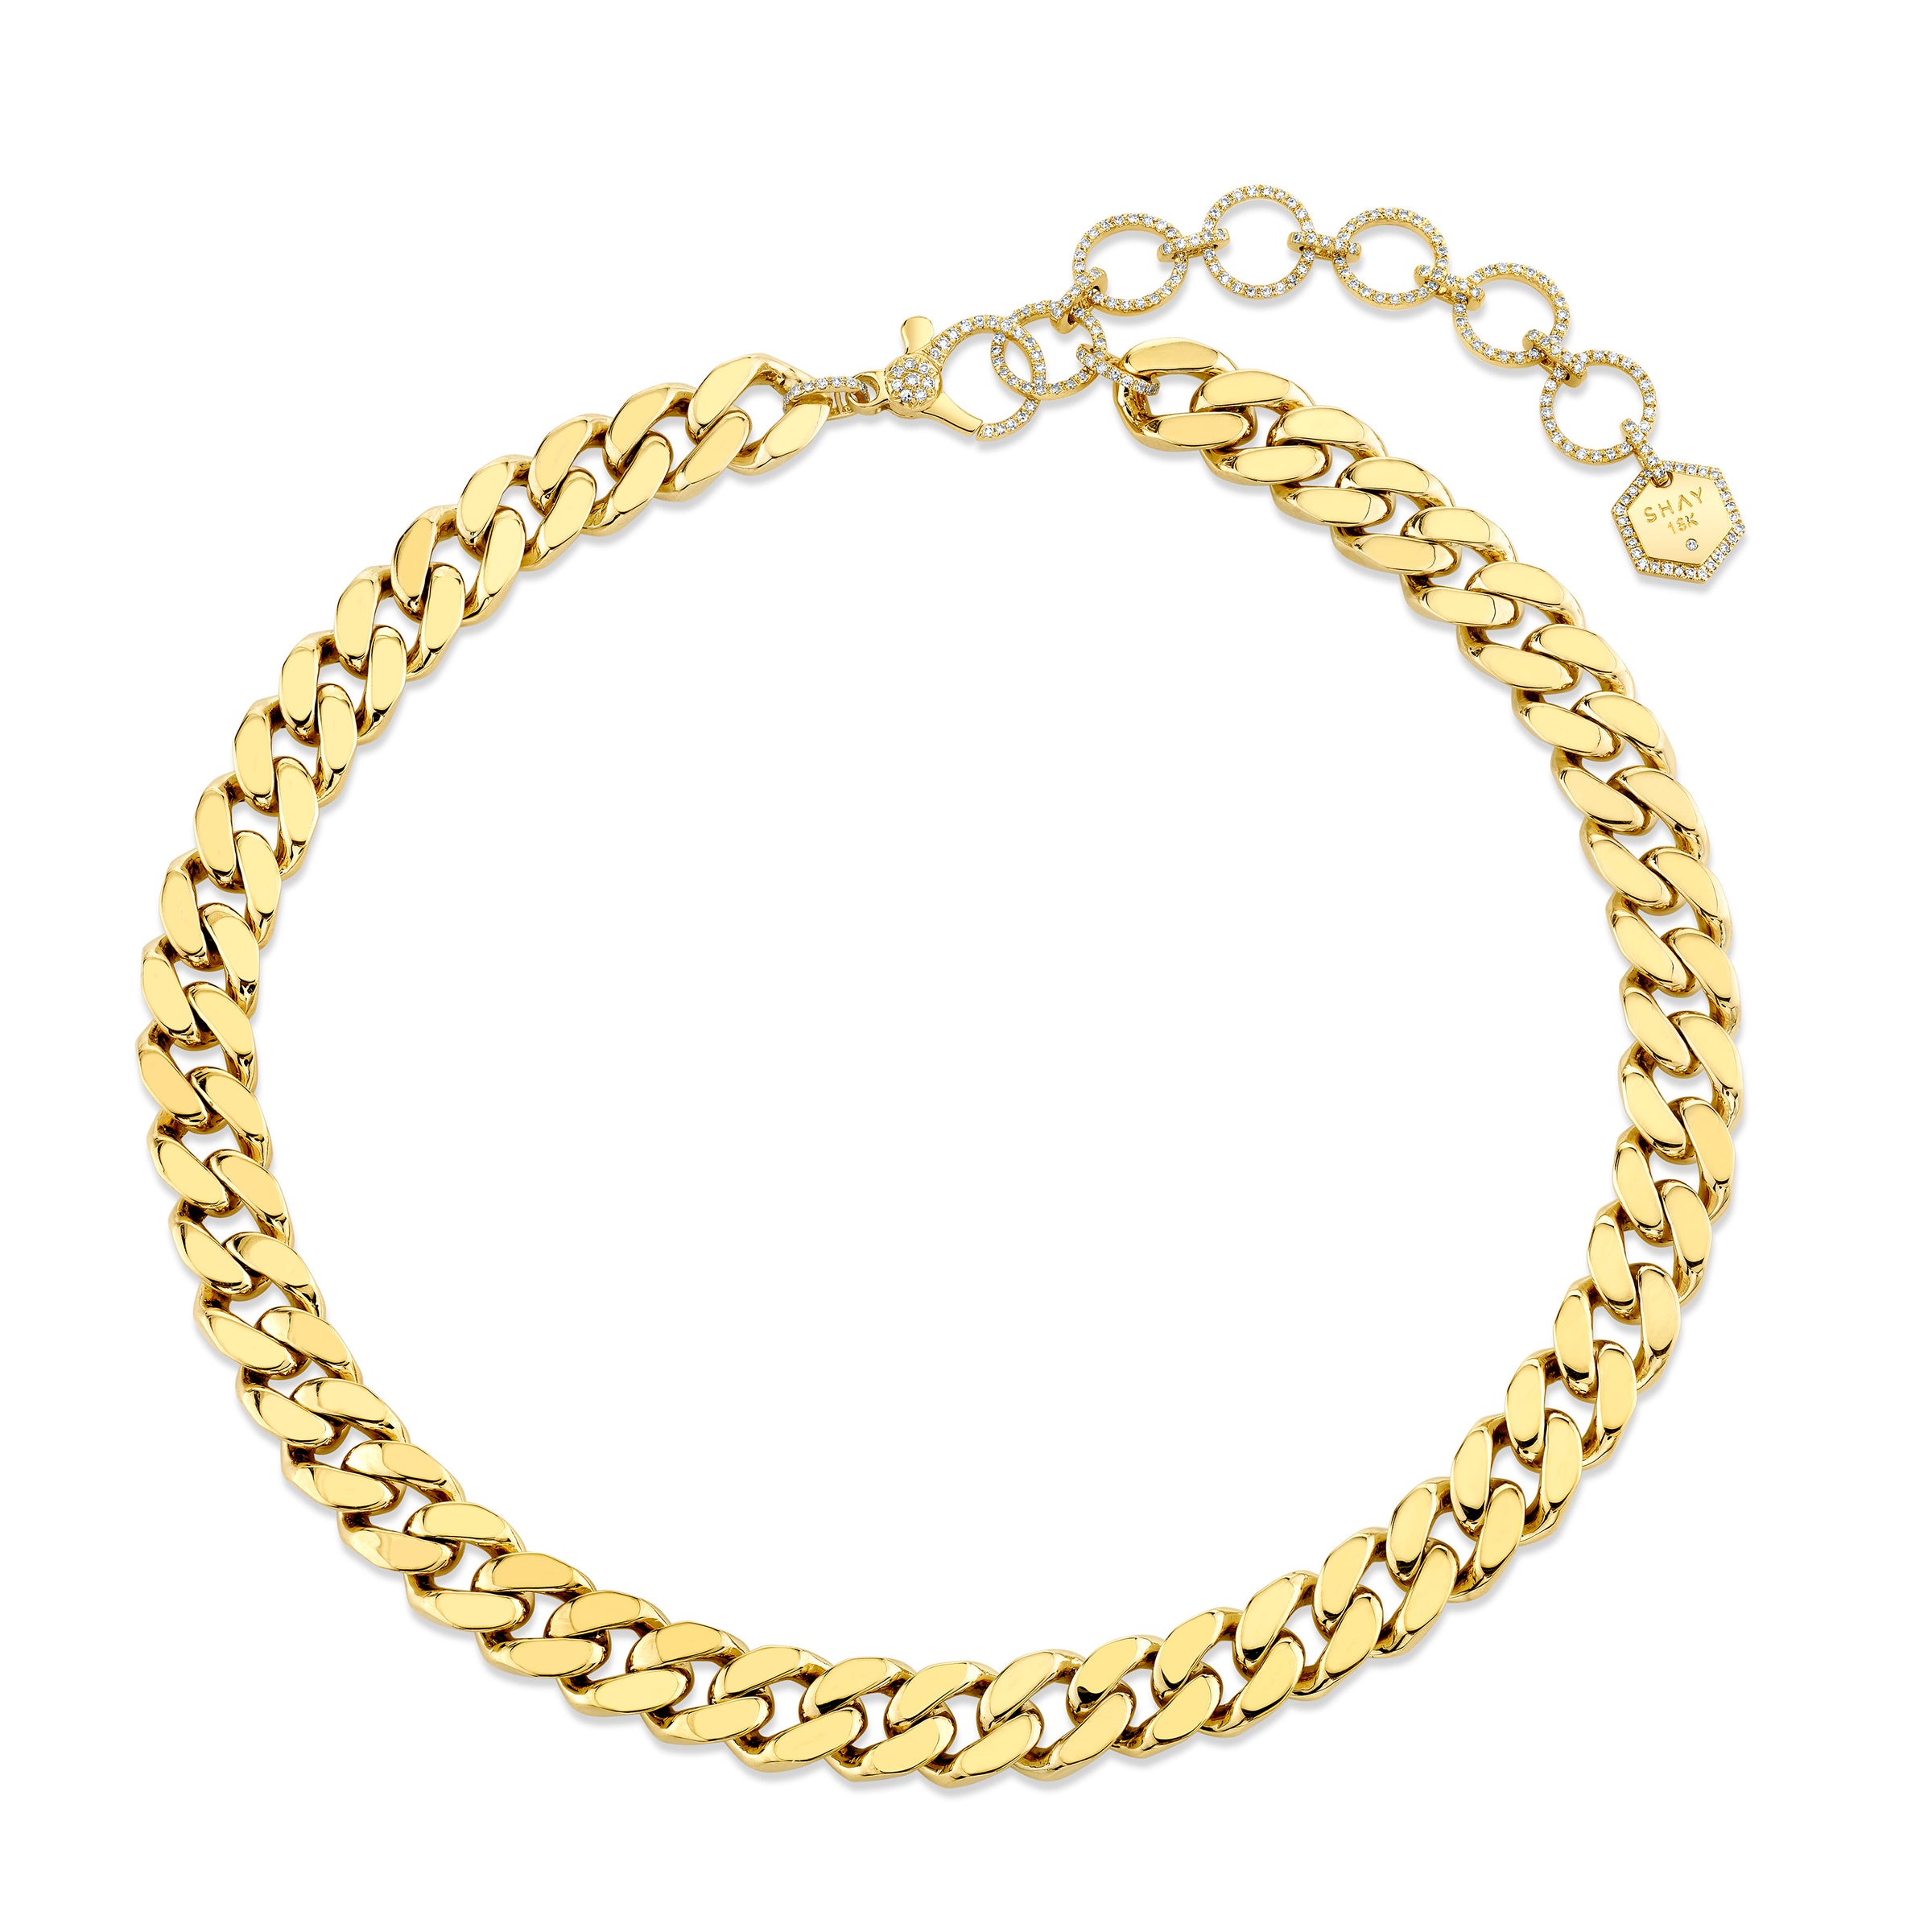 18K Gold Circle Link Necklace 16in